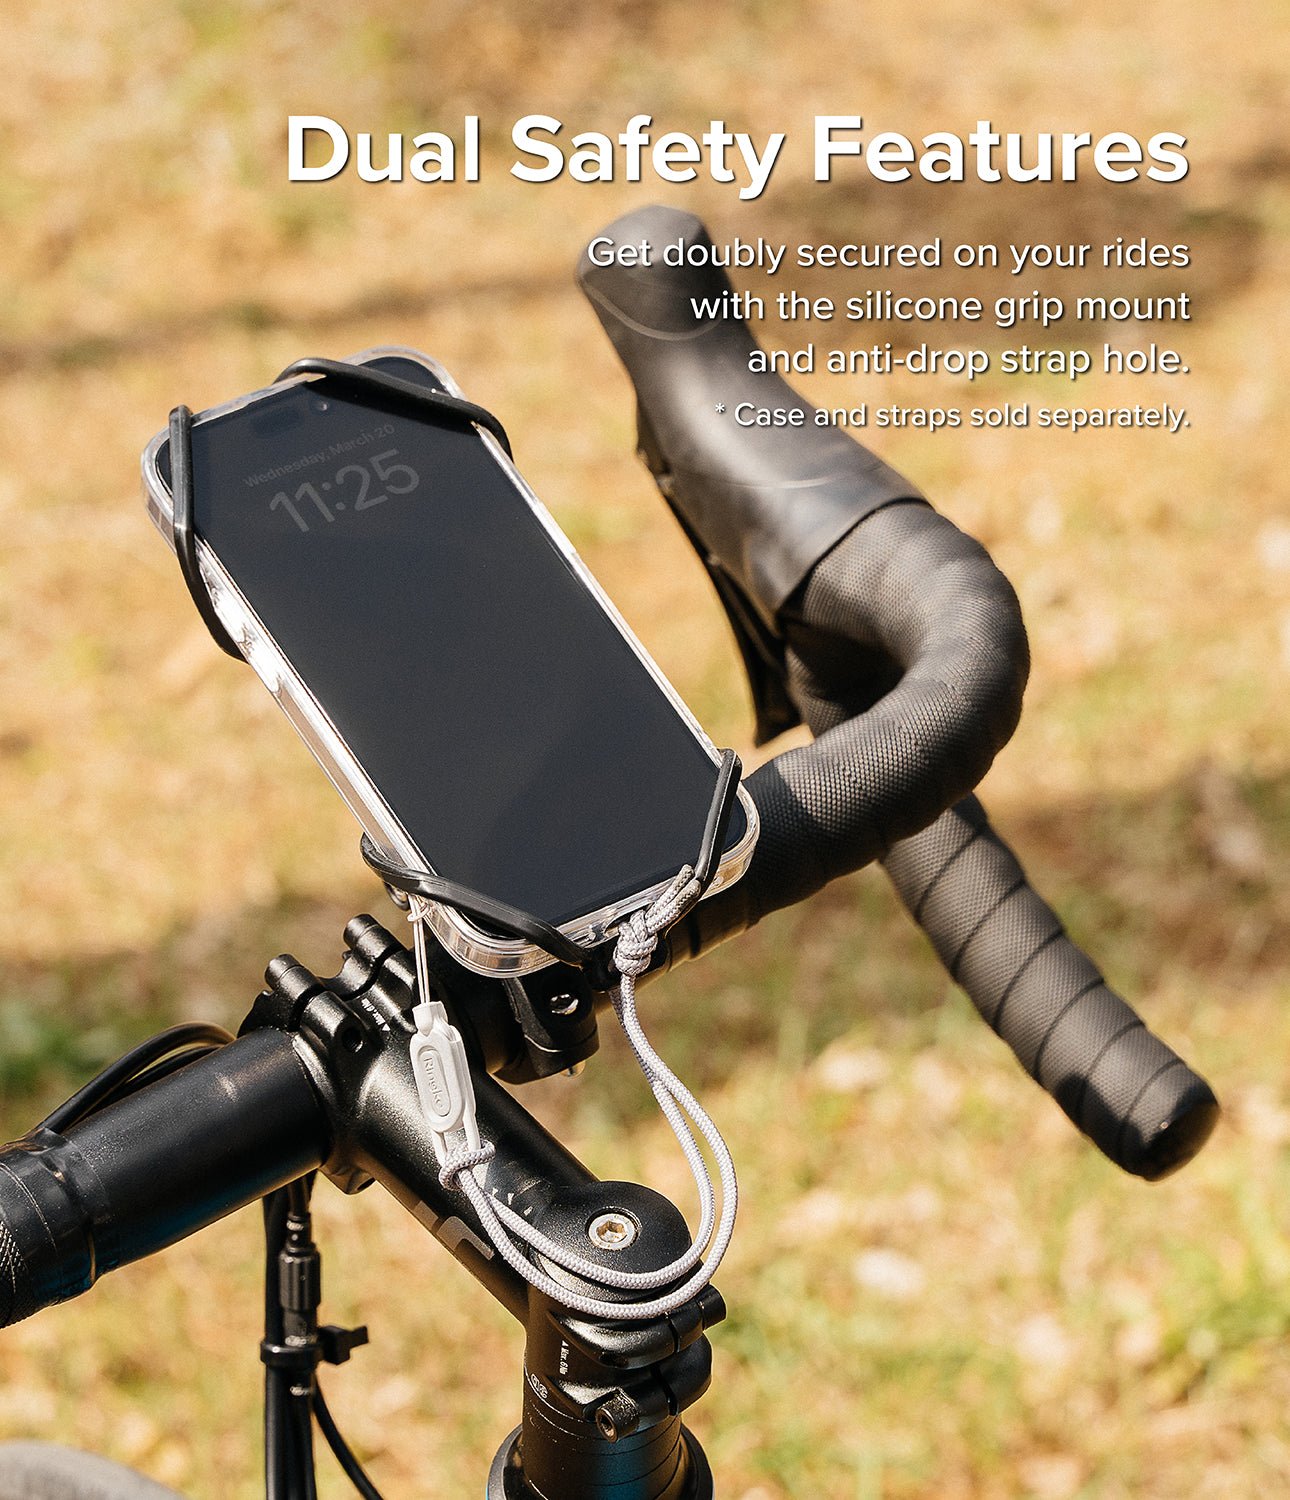 Quick & Go | Grip Bike Mount - Dual Safety Features. Get doubly secured on your rides with the silicone grip mount and anti-drop strap hole. Case and straps sold separately.